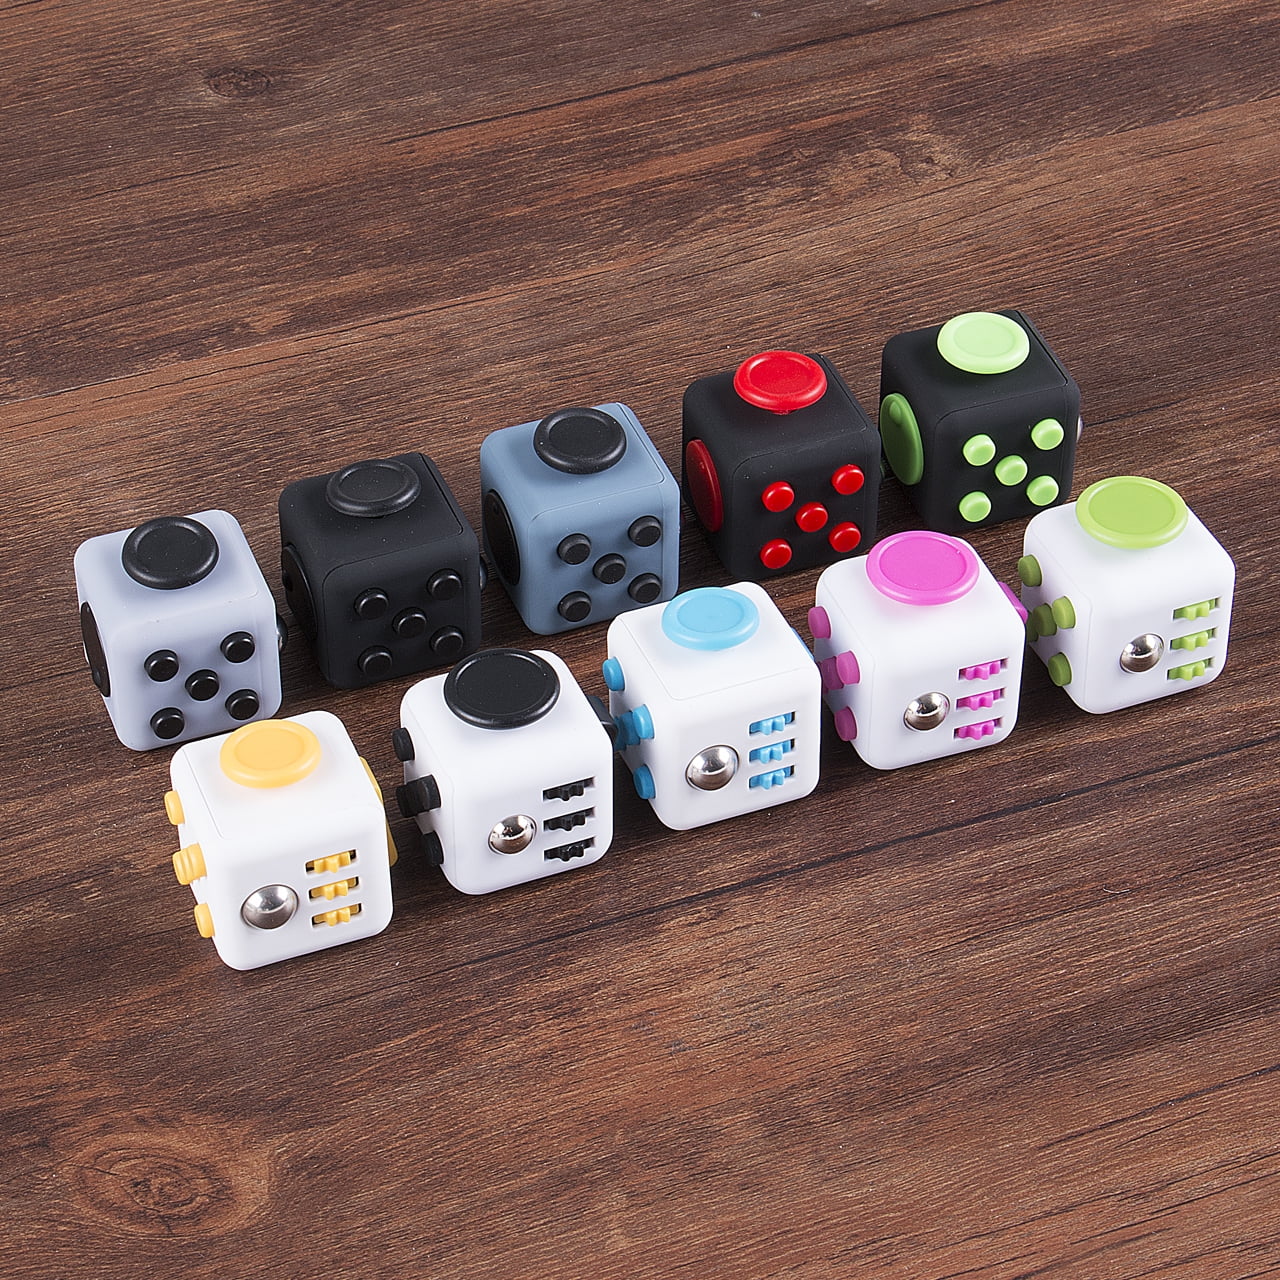 Fidget Toy Cube Stress Anxiety Relief Desk Toy For Adults Kids Focus 